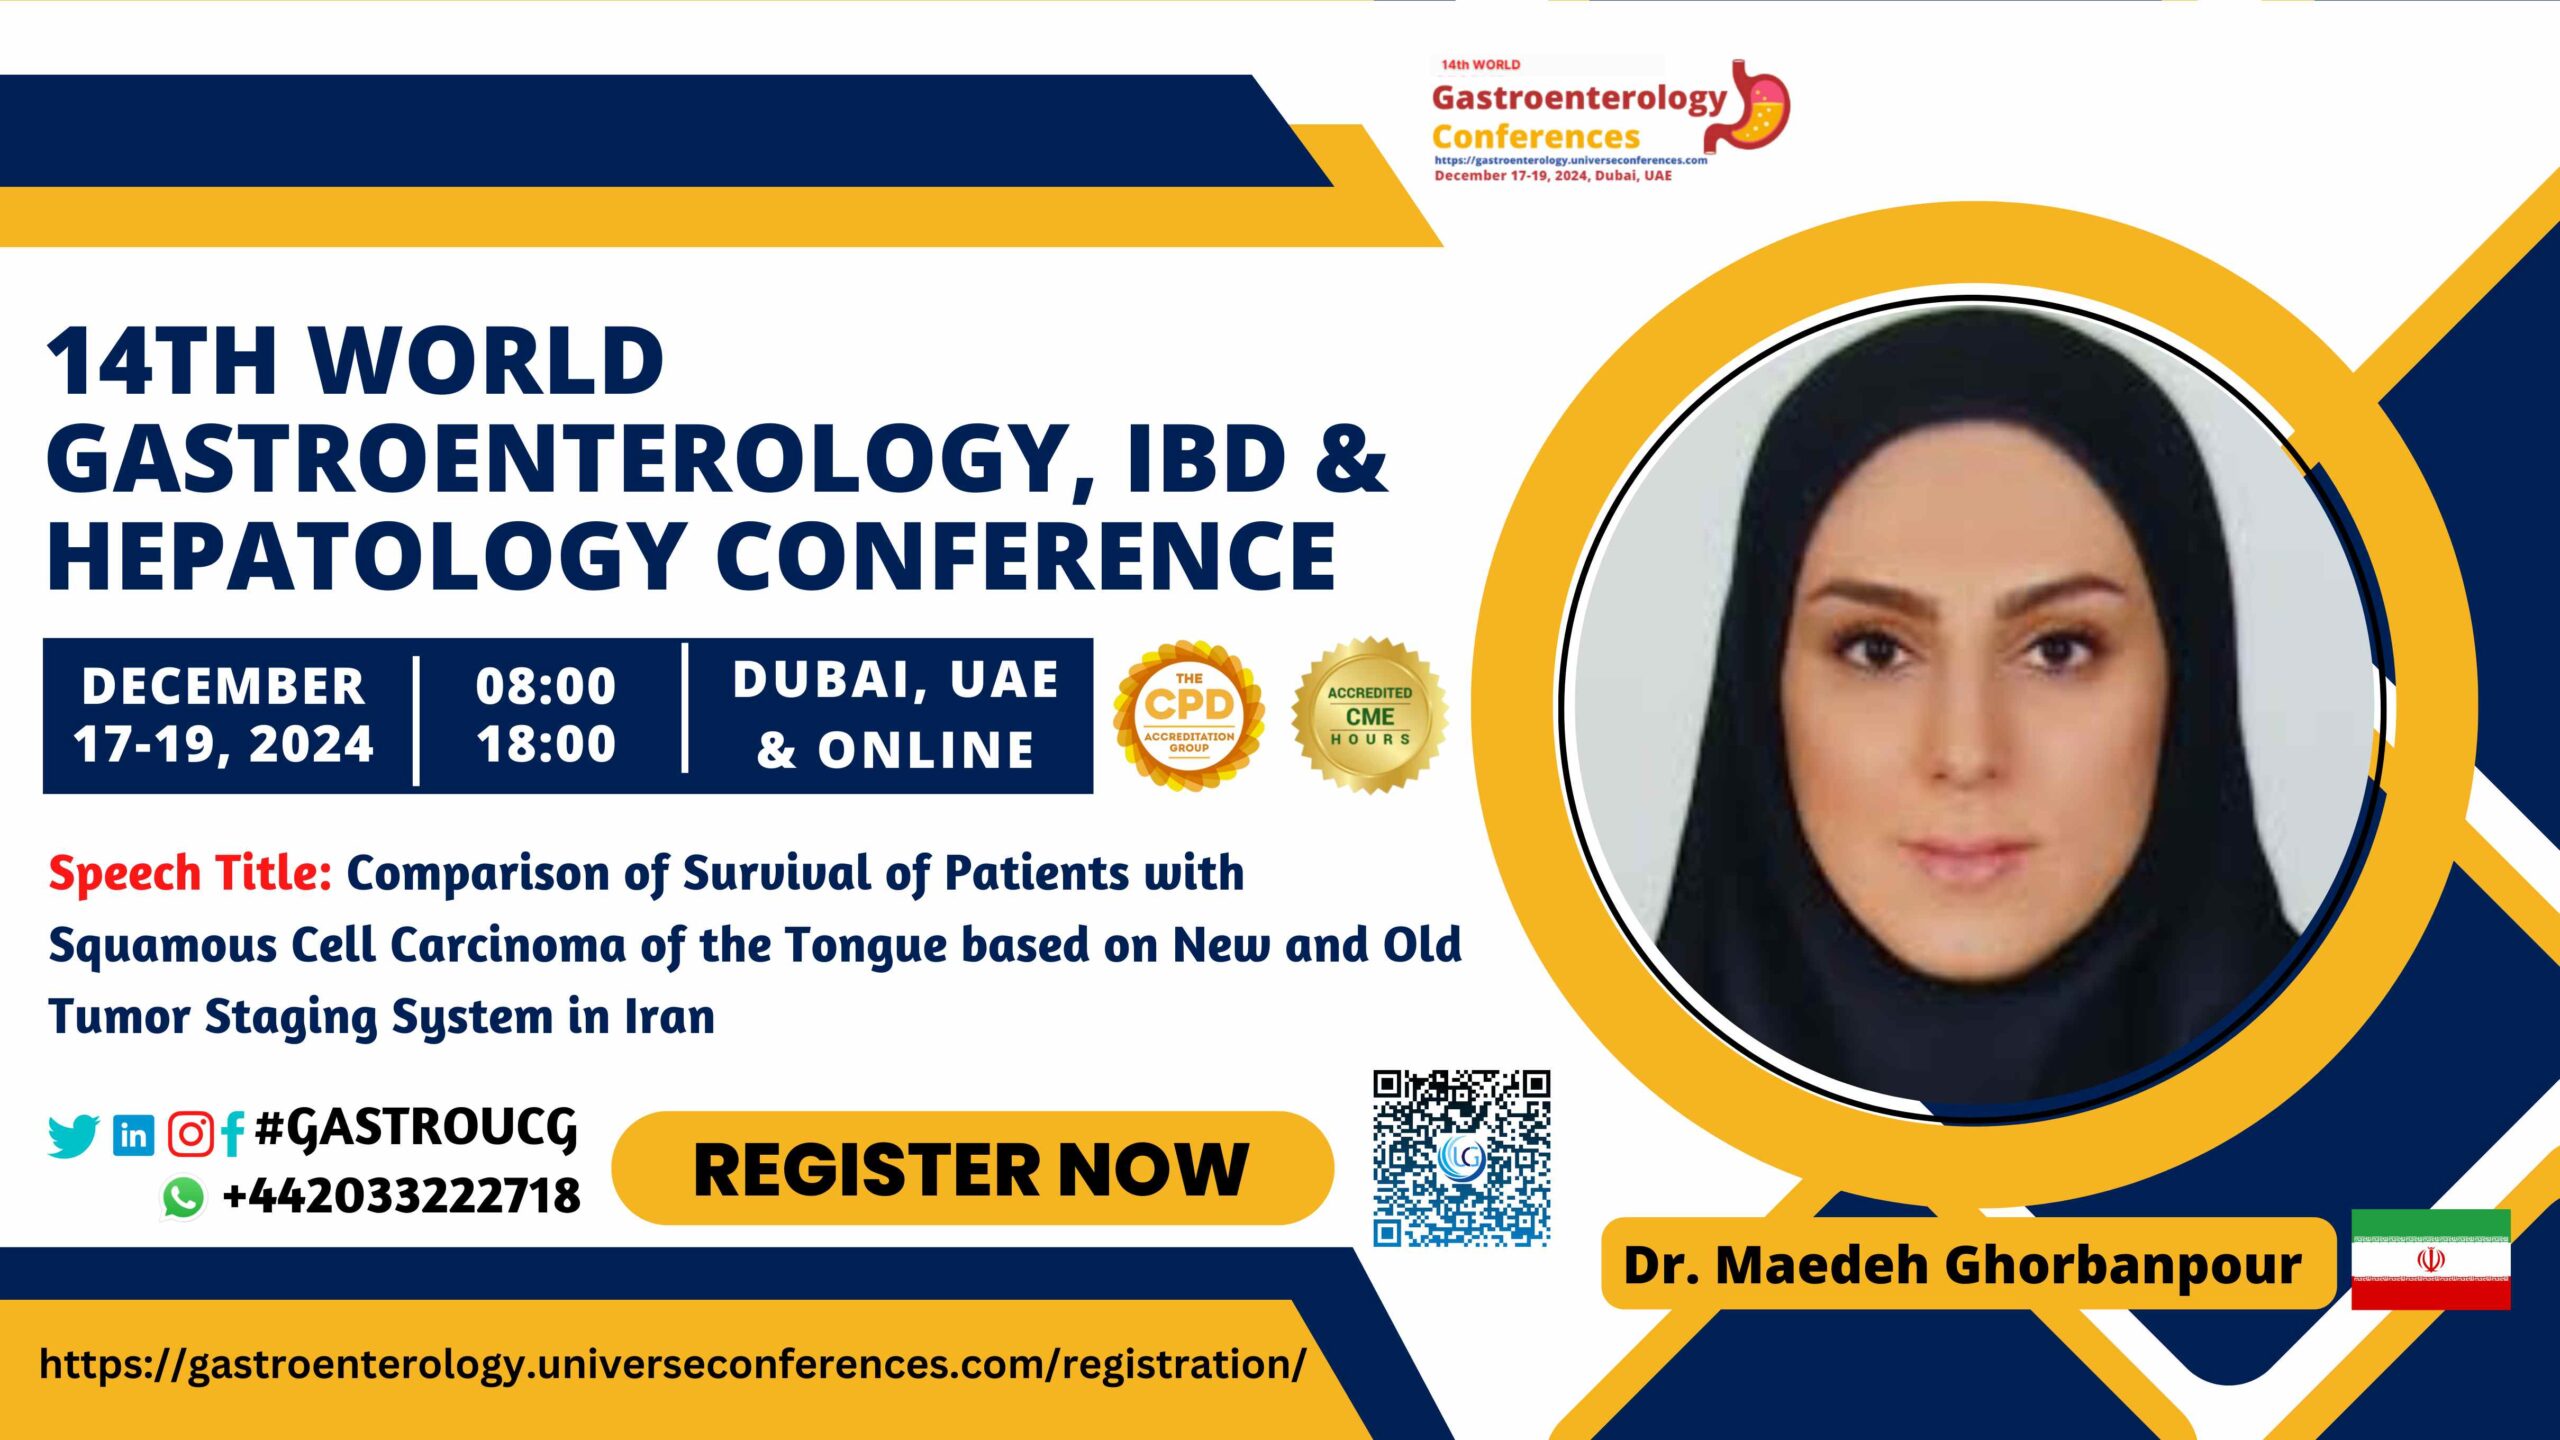 Dr. Maedeh Ghorbanpour _14th World Gastroenterology, IBD & Hepatology Conference